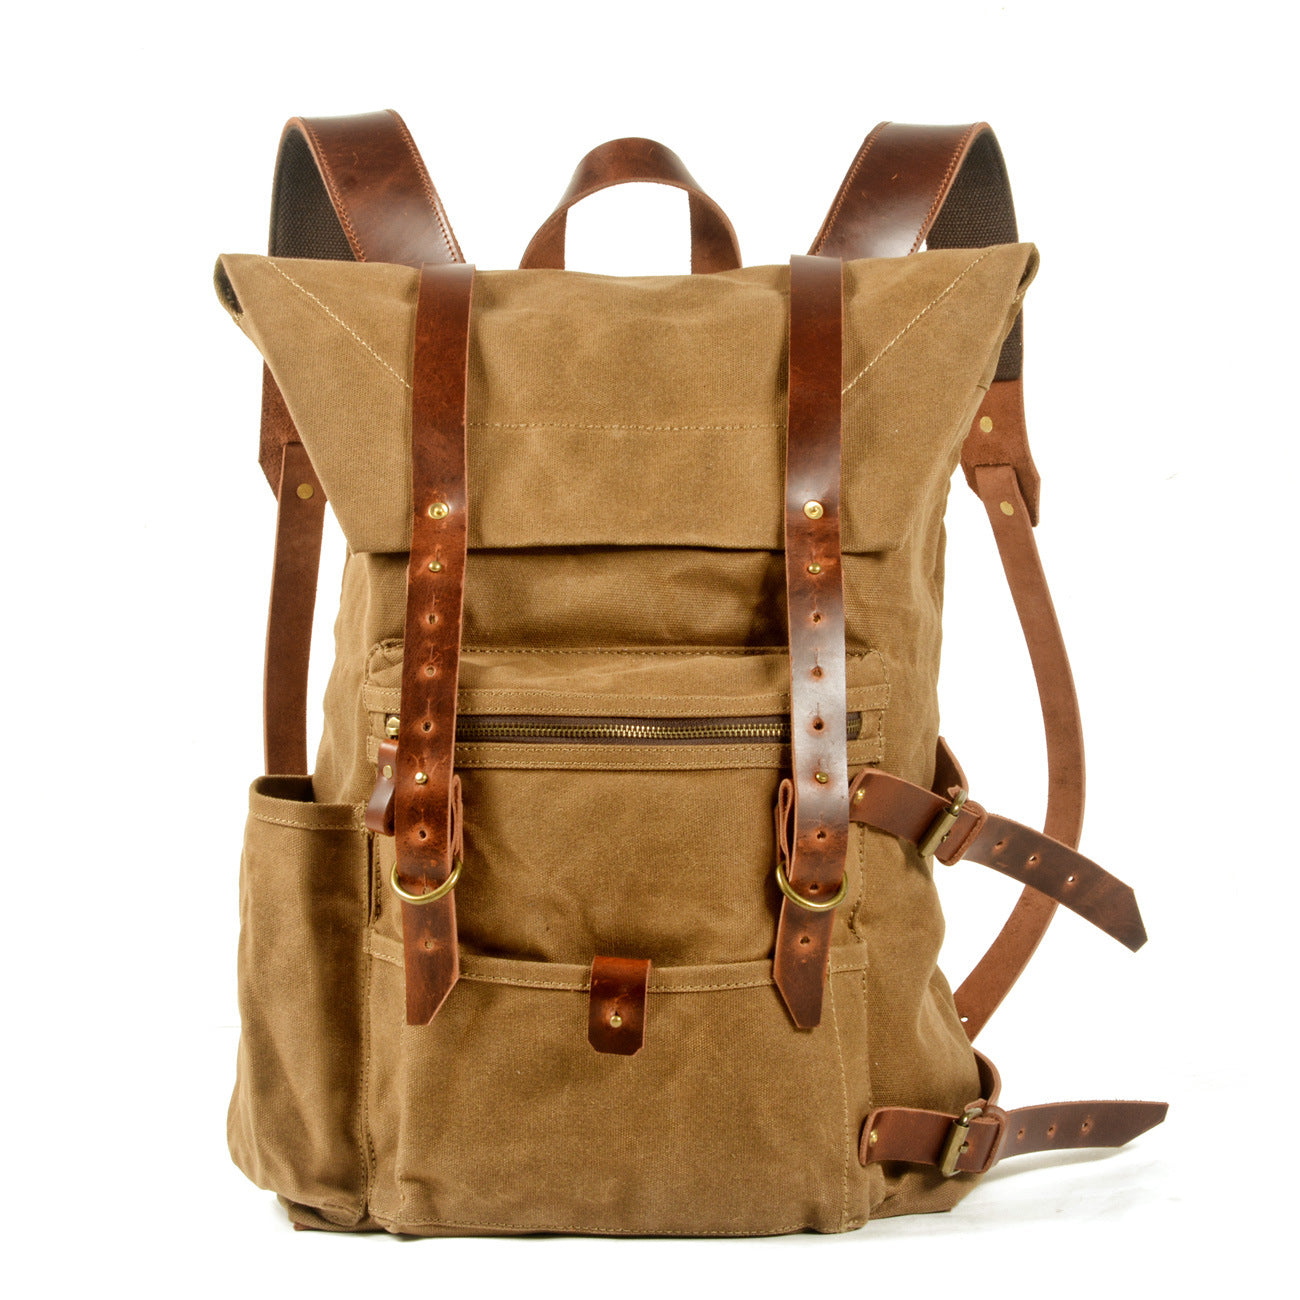 Retro Handmade Water-Resistant Waxed Canvas Travel Backpack